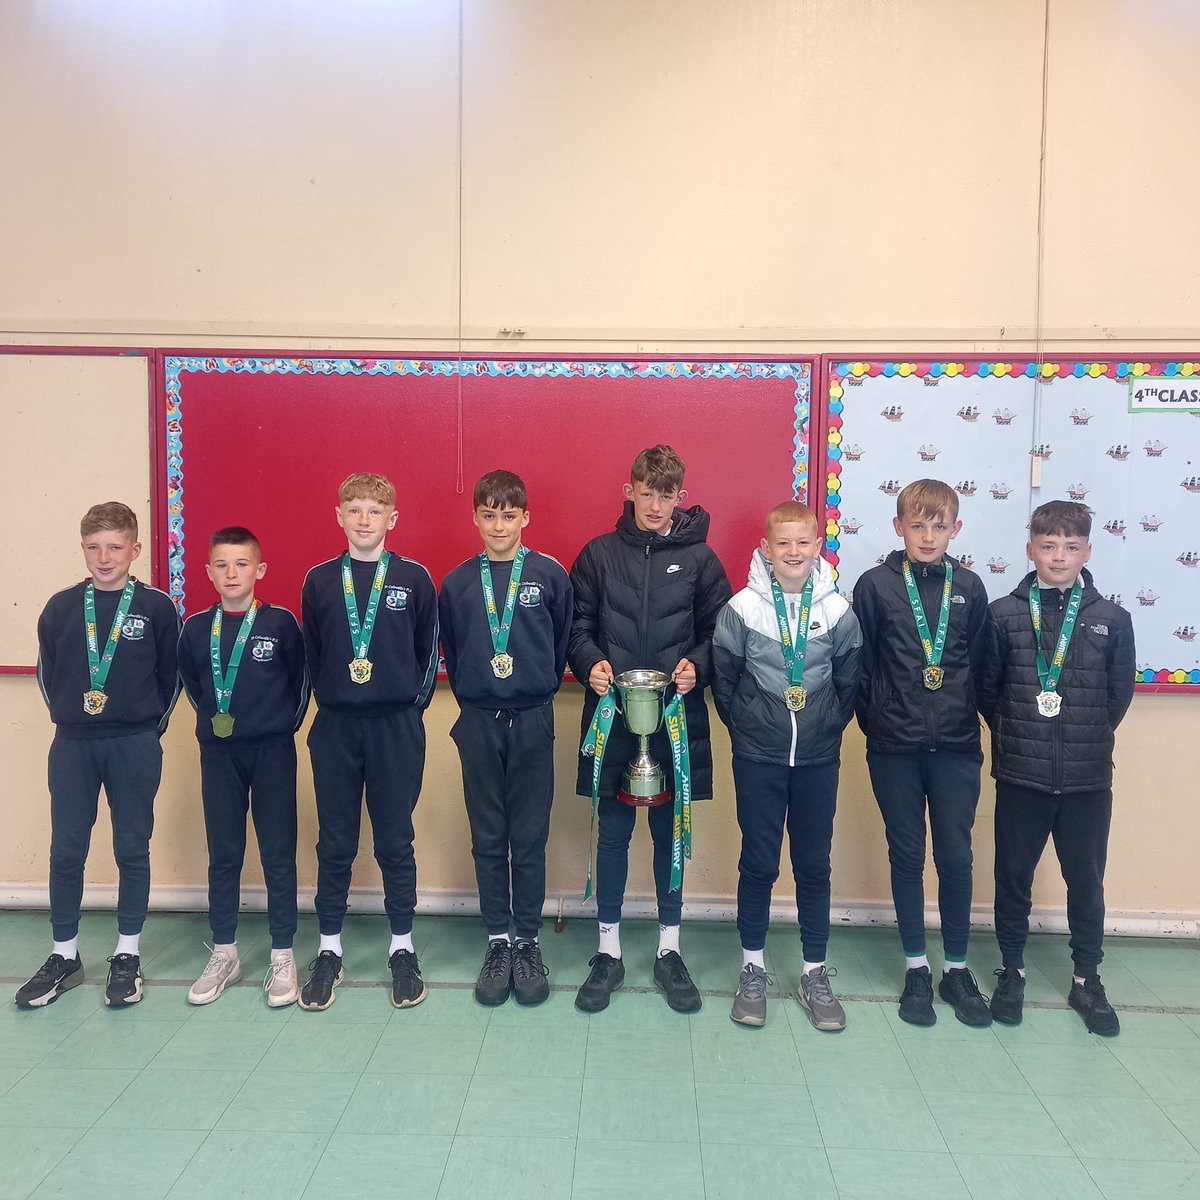 🏆 Champions parade today for our 8 outstanding pupils for bringing home the National Under 13 soccer trophy this weekend with @btharps! 🎉 Your hard work, dedication, and talent have truly paid off. You've made us all proud! 🌟 #NationalChampions @faischools #TrophyWinners 🏅👏